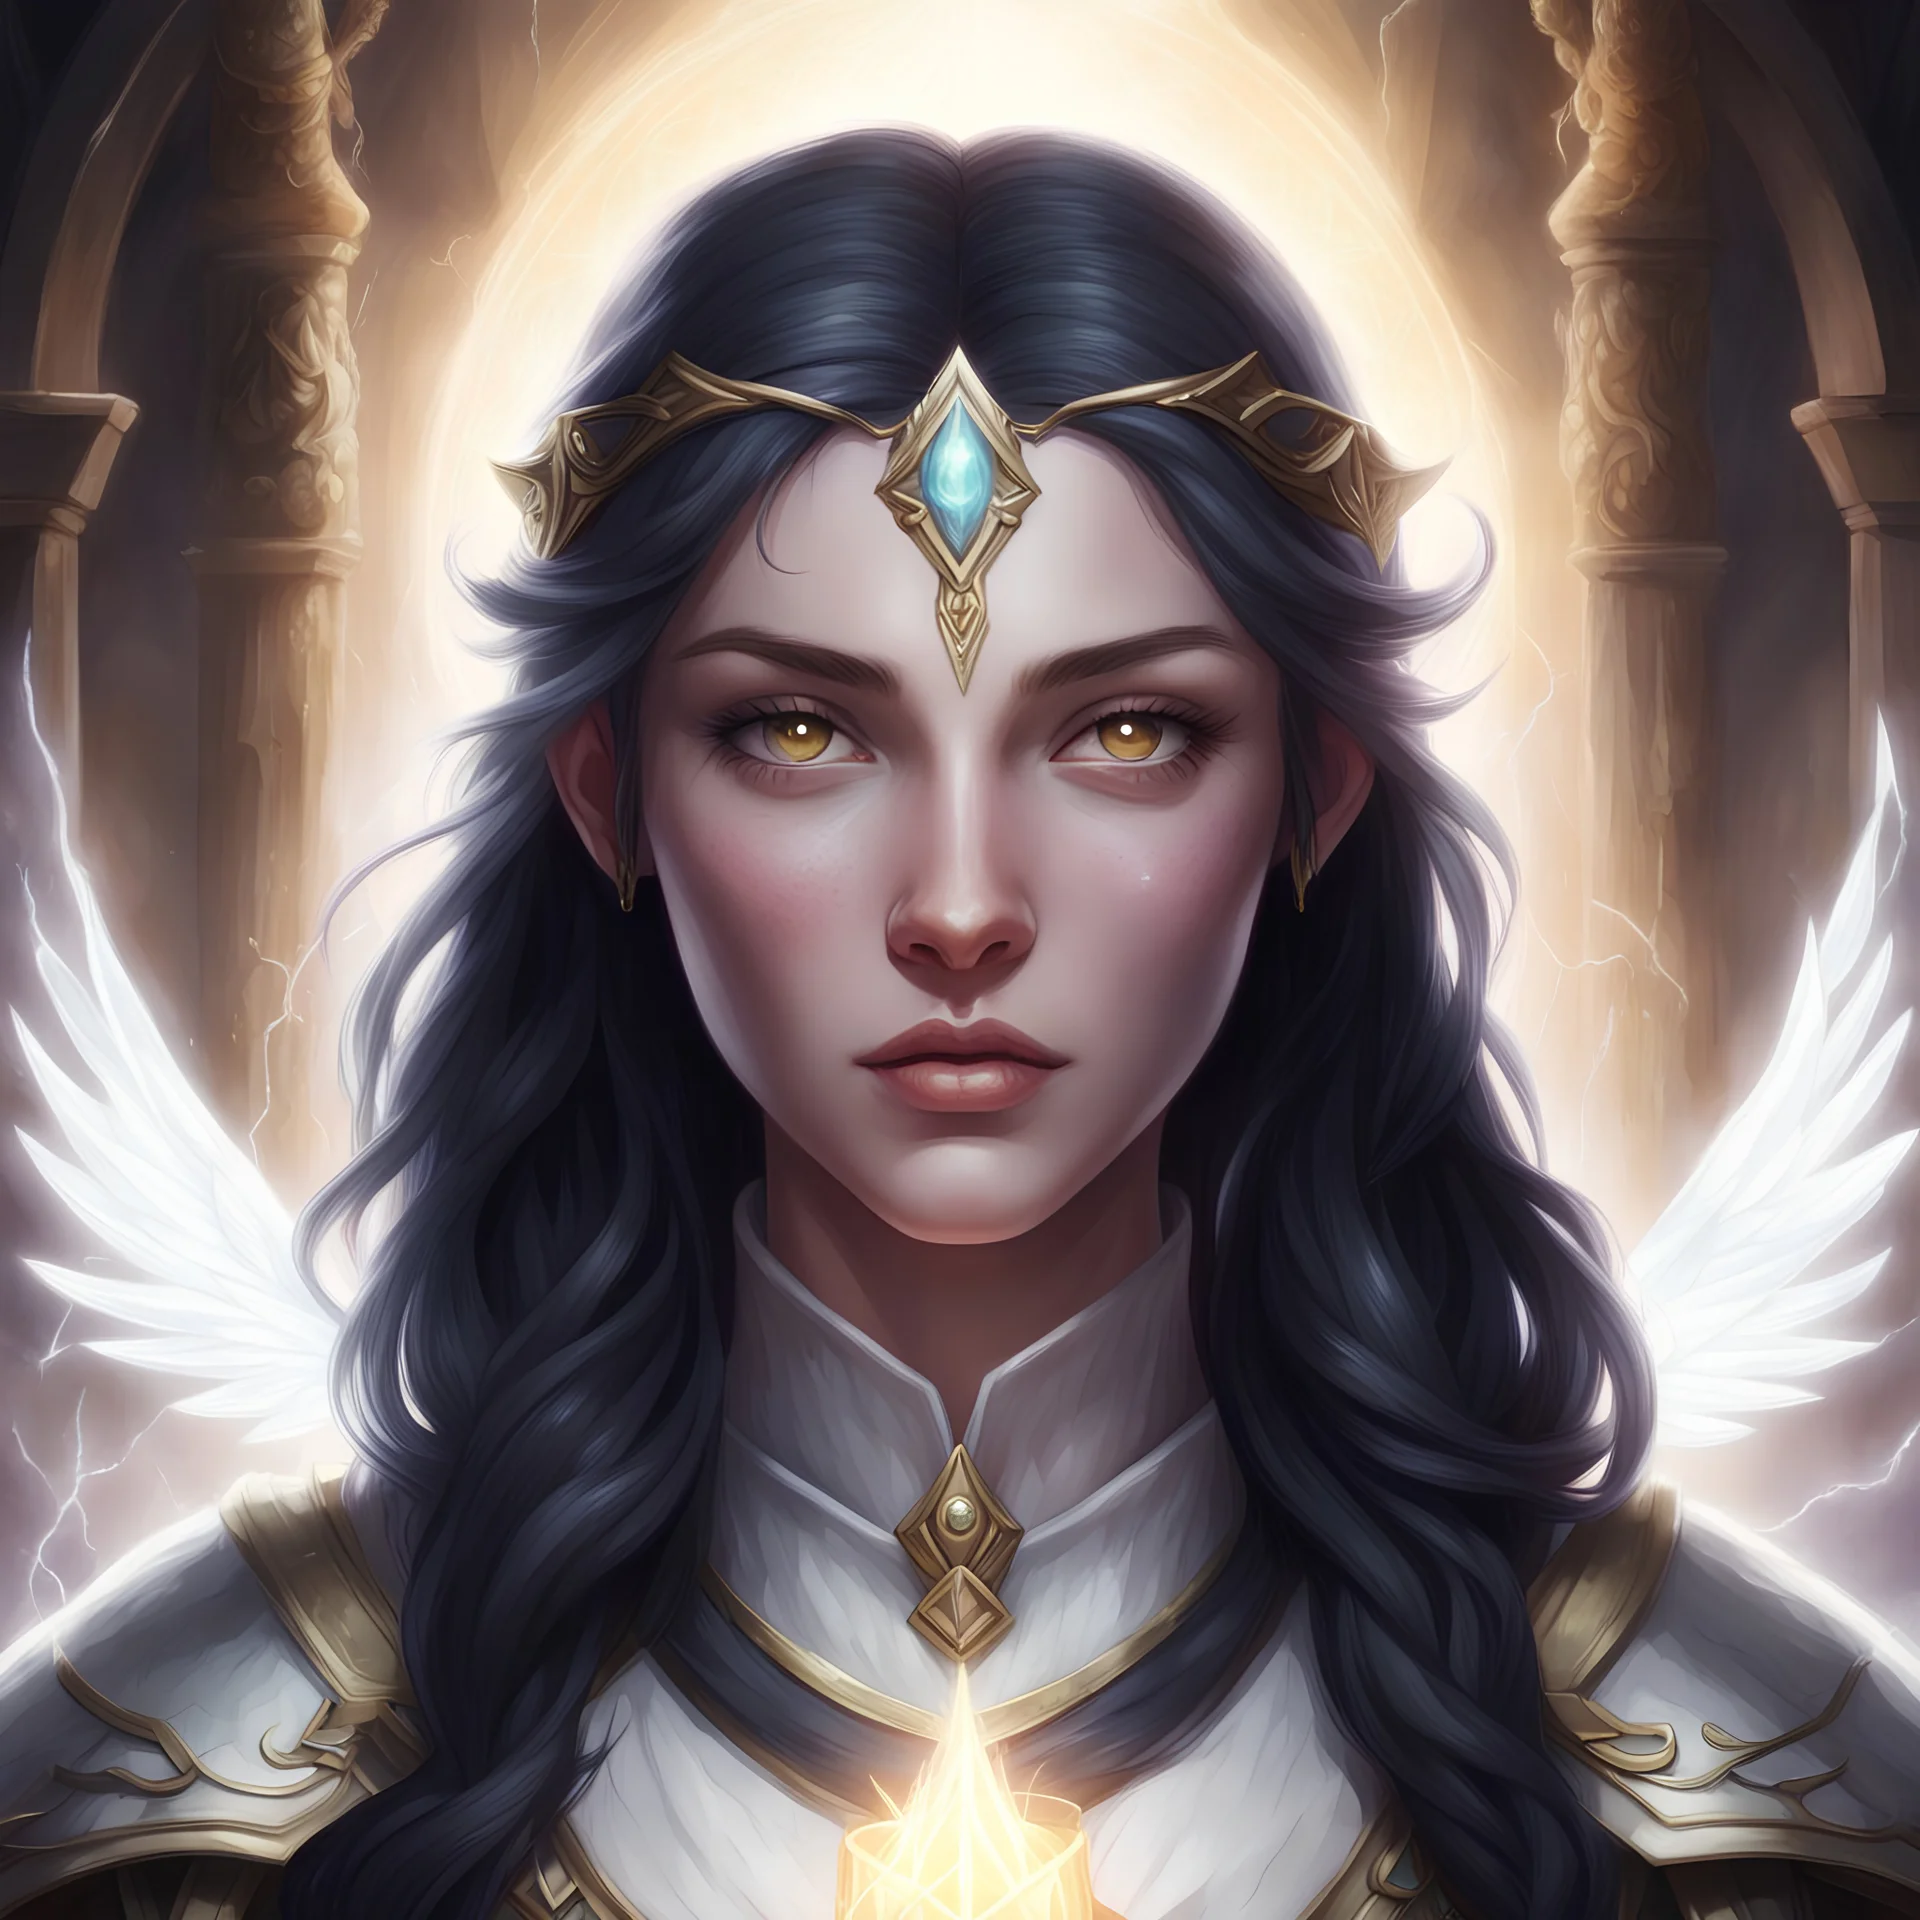 Generate a dungeons and dragons character portrait of the face of a female cleric of peace aasimar with pale skin blessed by the goddess Selune. She has black hair and glowing eyes and is surrounded by holy light